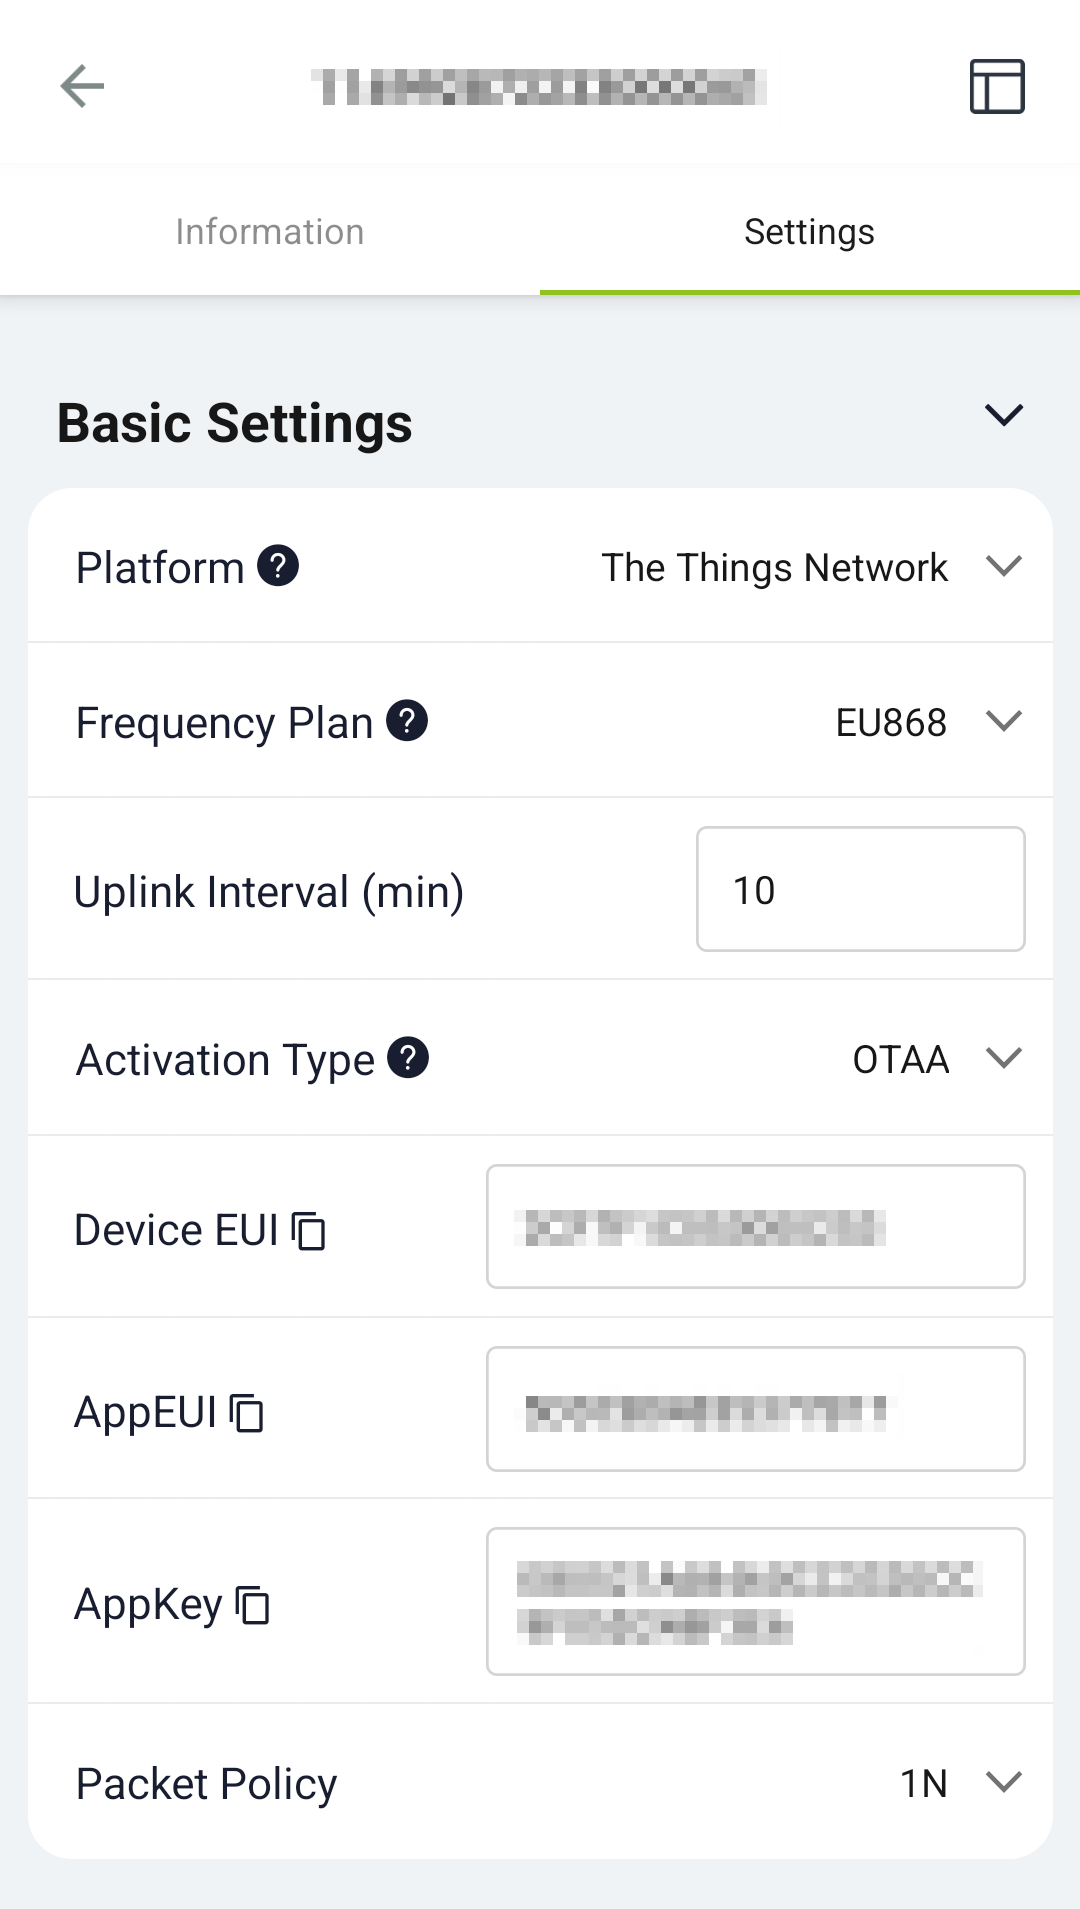 Settings tab of the device.